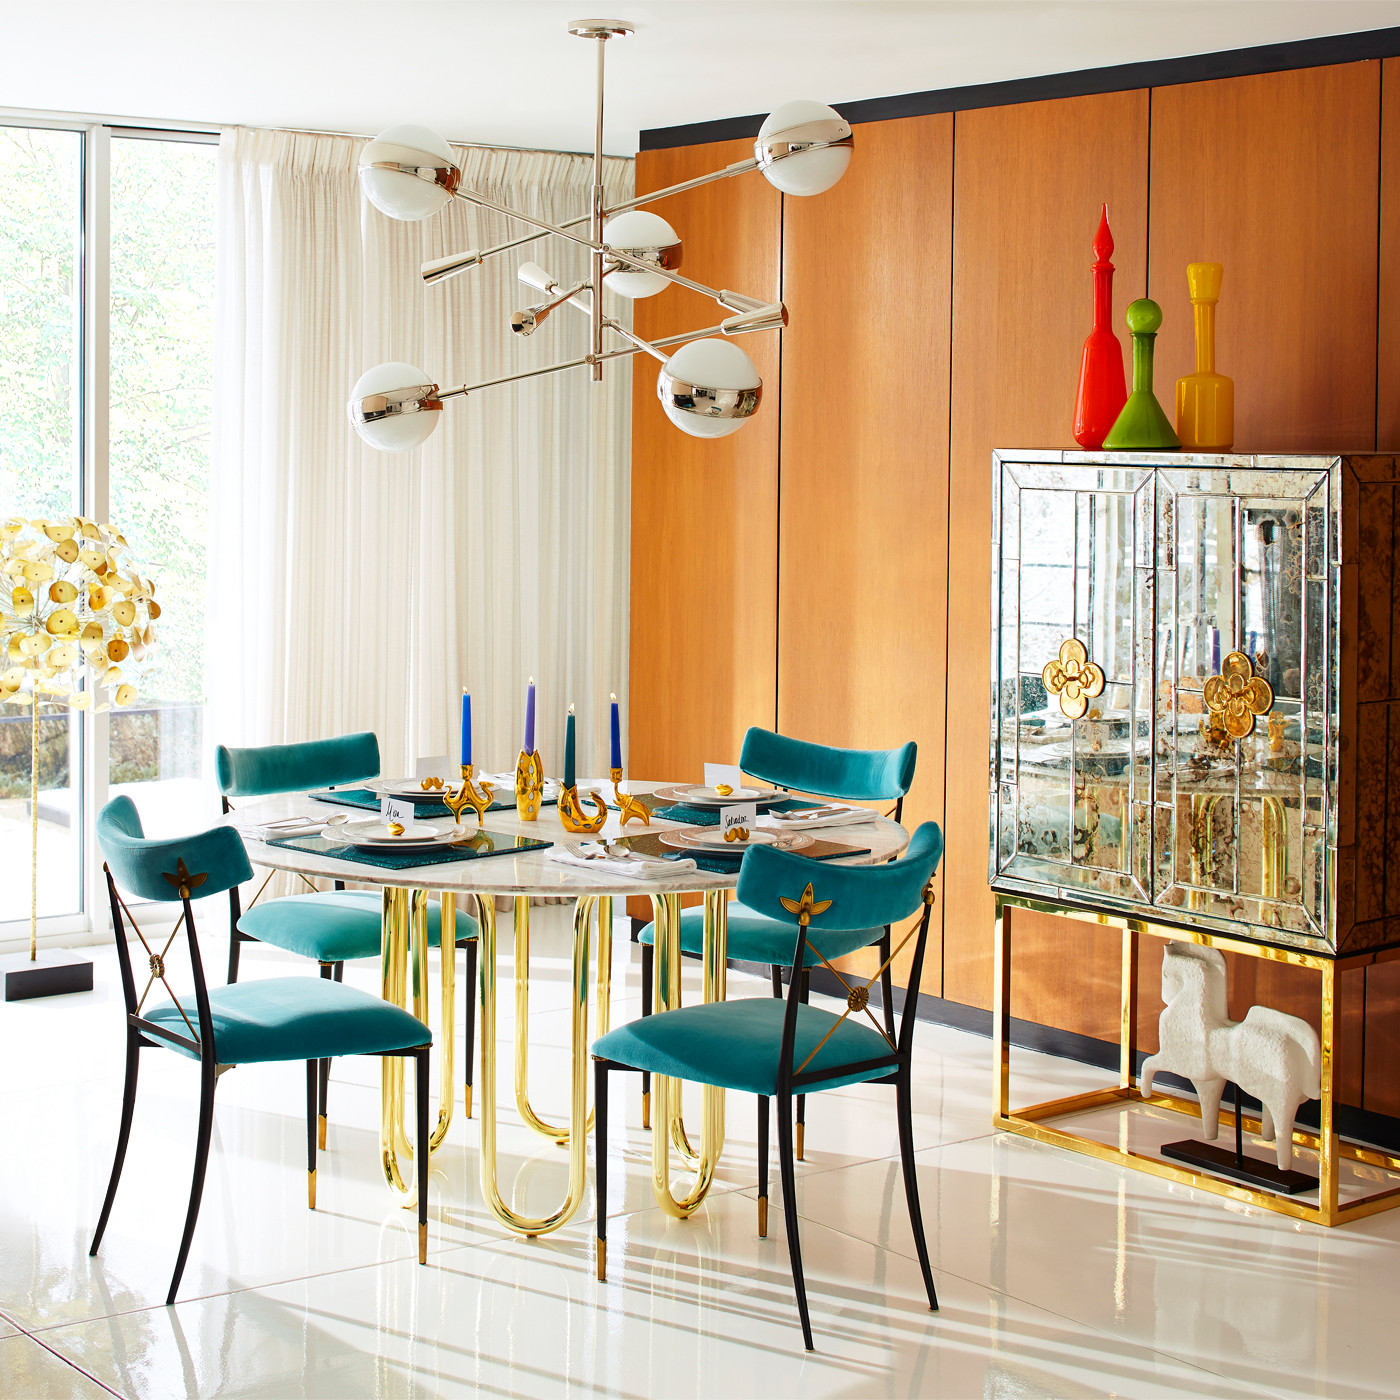 Scalinatella Dining Table, Jonathan Adler Dining Room Chairs